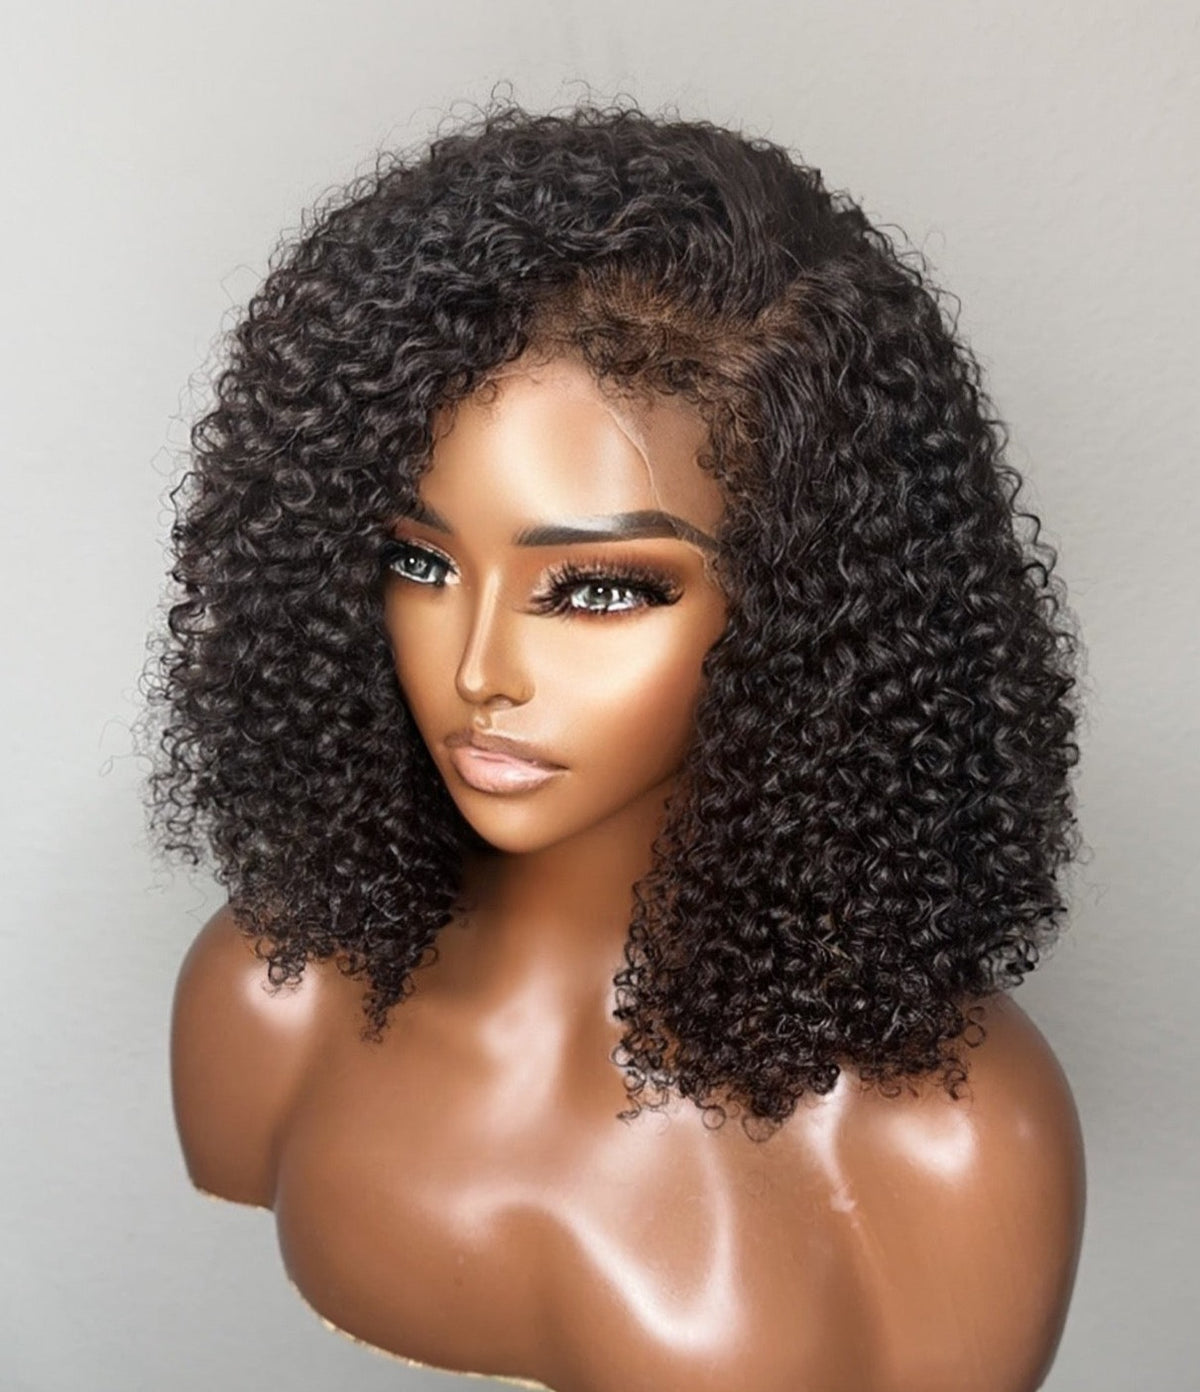 "Fatima" Afro Kinky Curly with Natural Edges